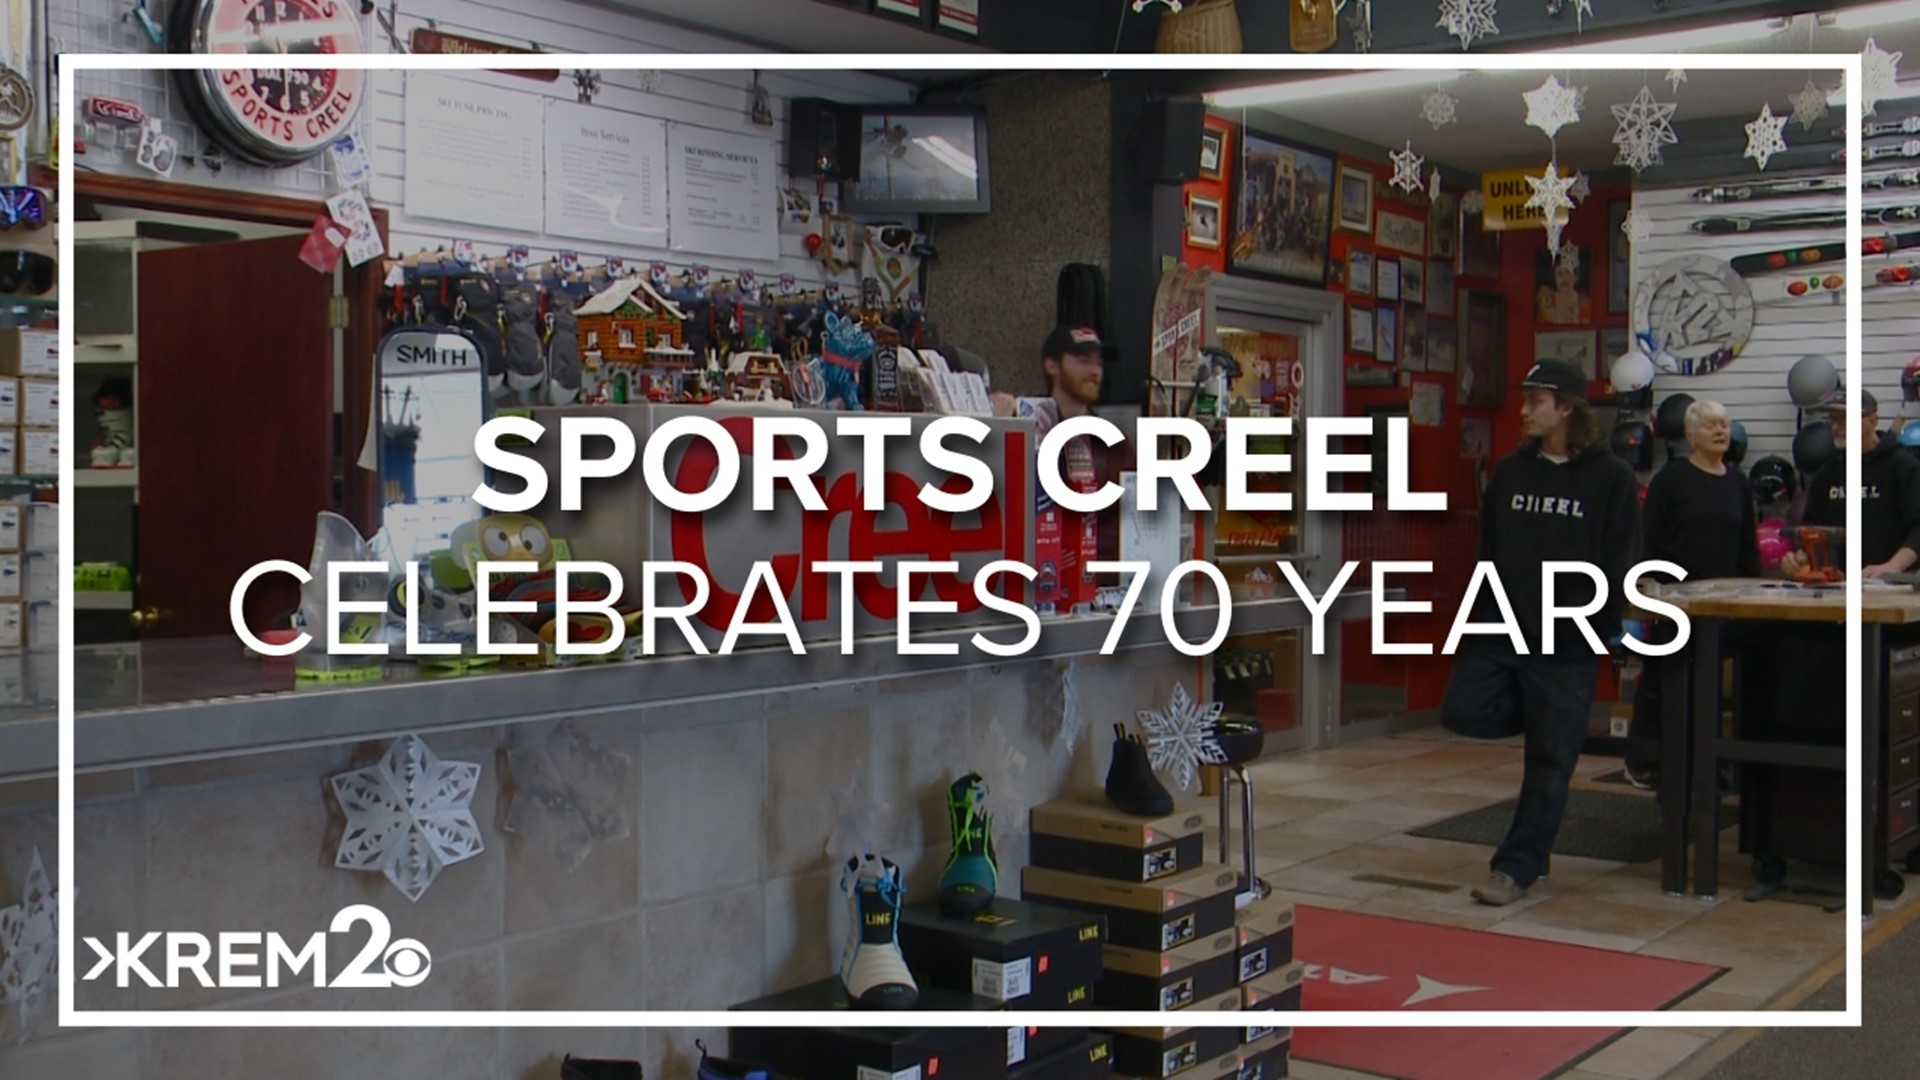 The shop is celebrating three generations of serving Spokane and other athletes.